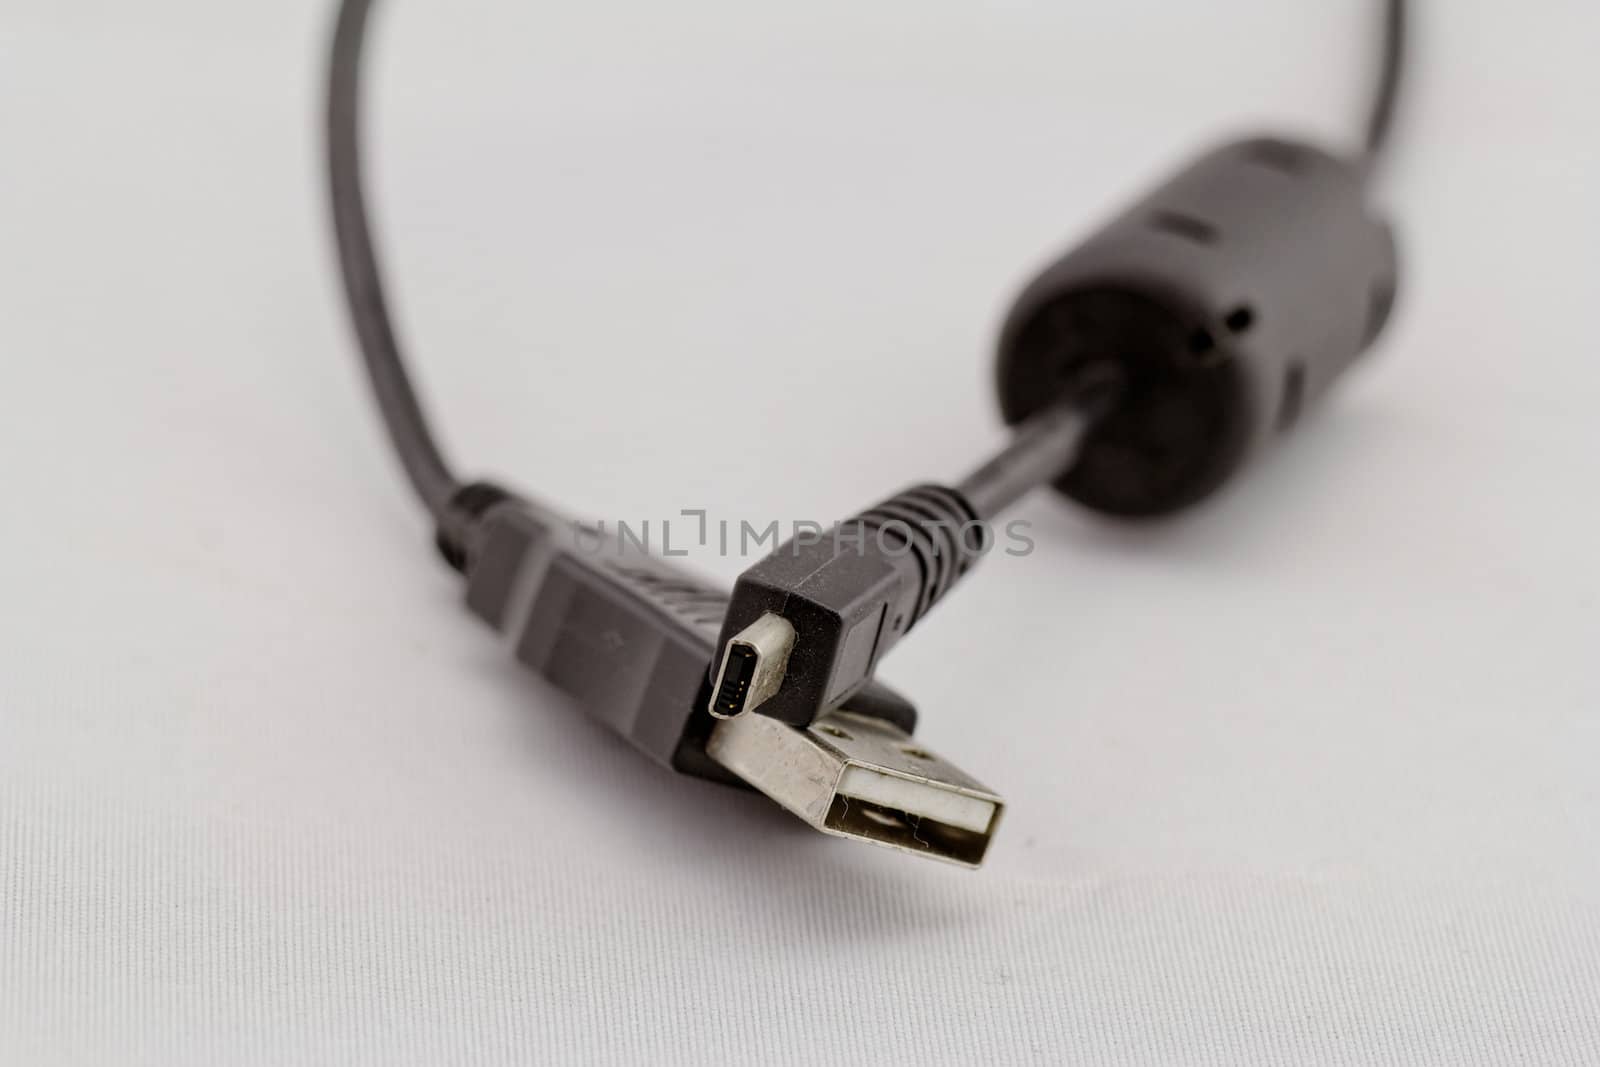 usb extrension cable by NagyDodo